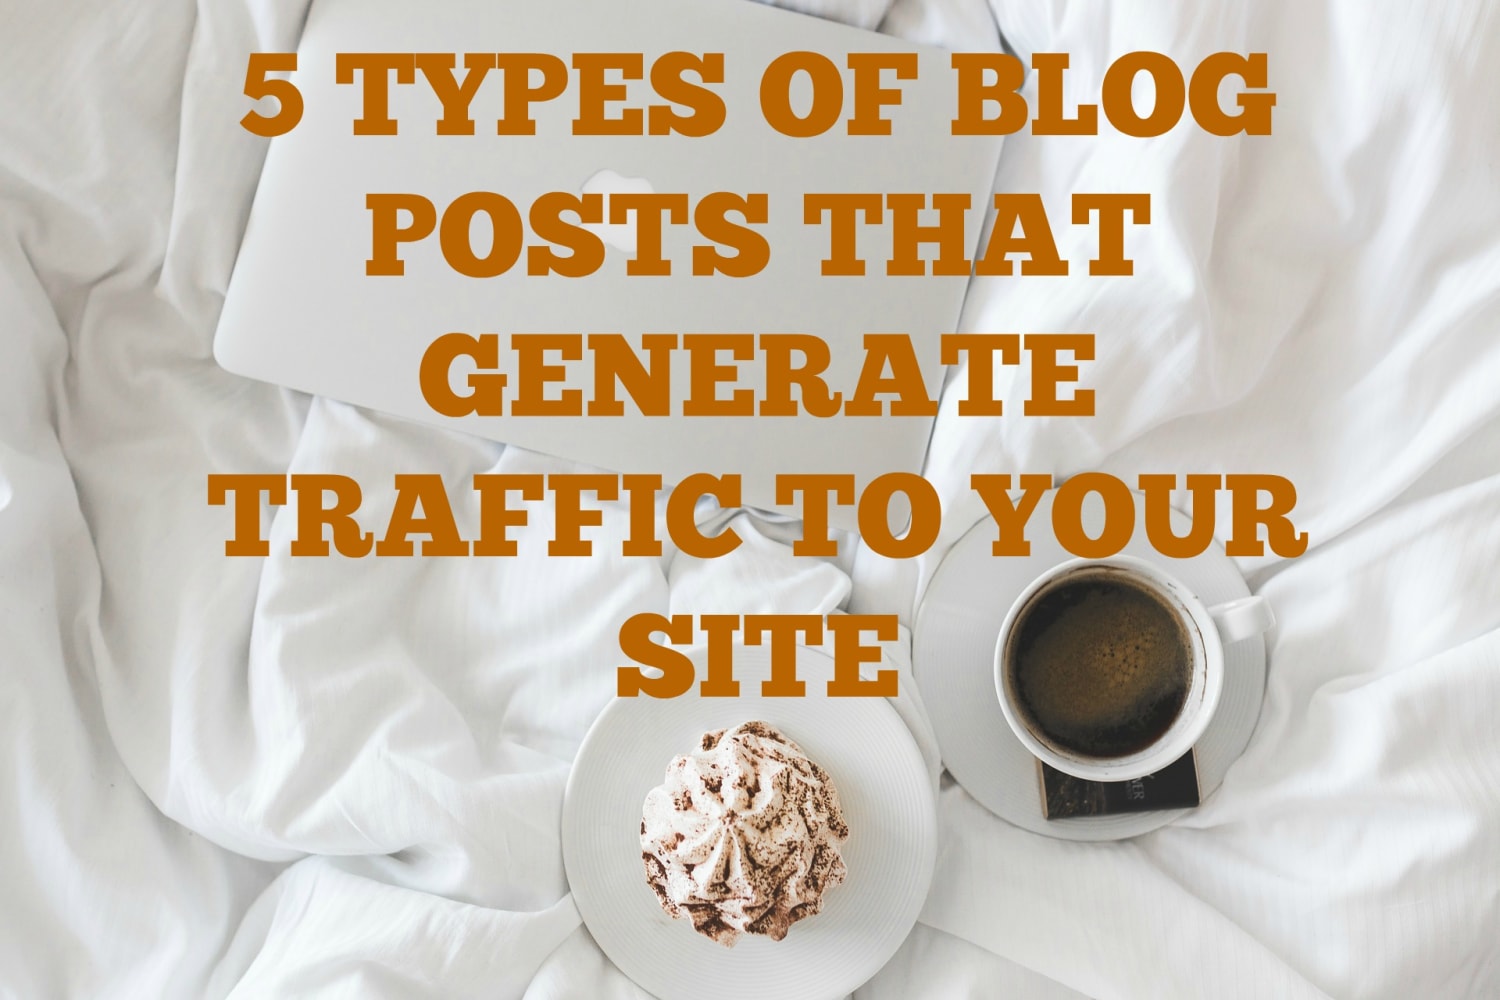 5 TYPES OF BLOG POSTS THAT GENERATE TRAFFIC TO YOUR SITE